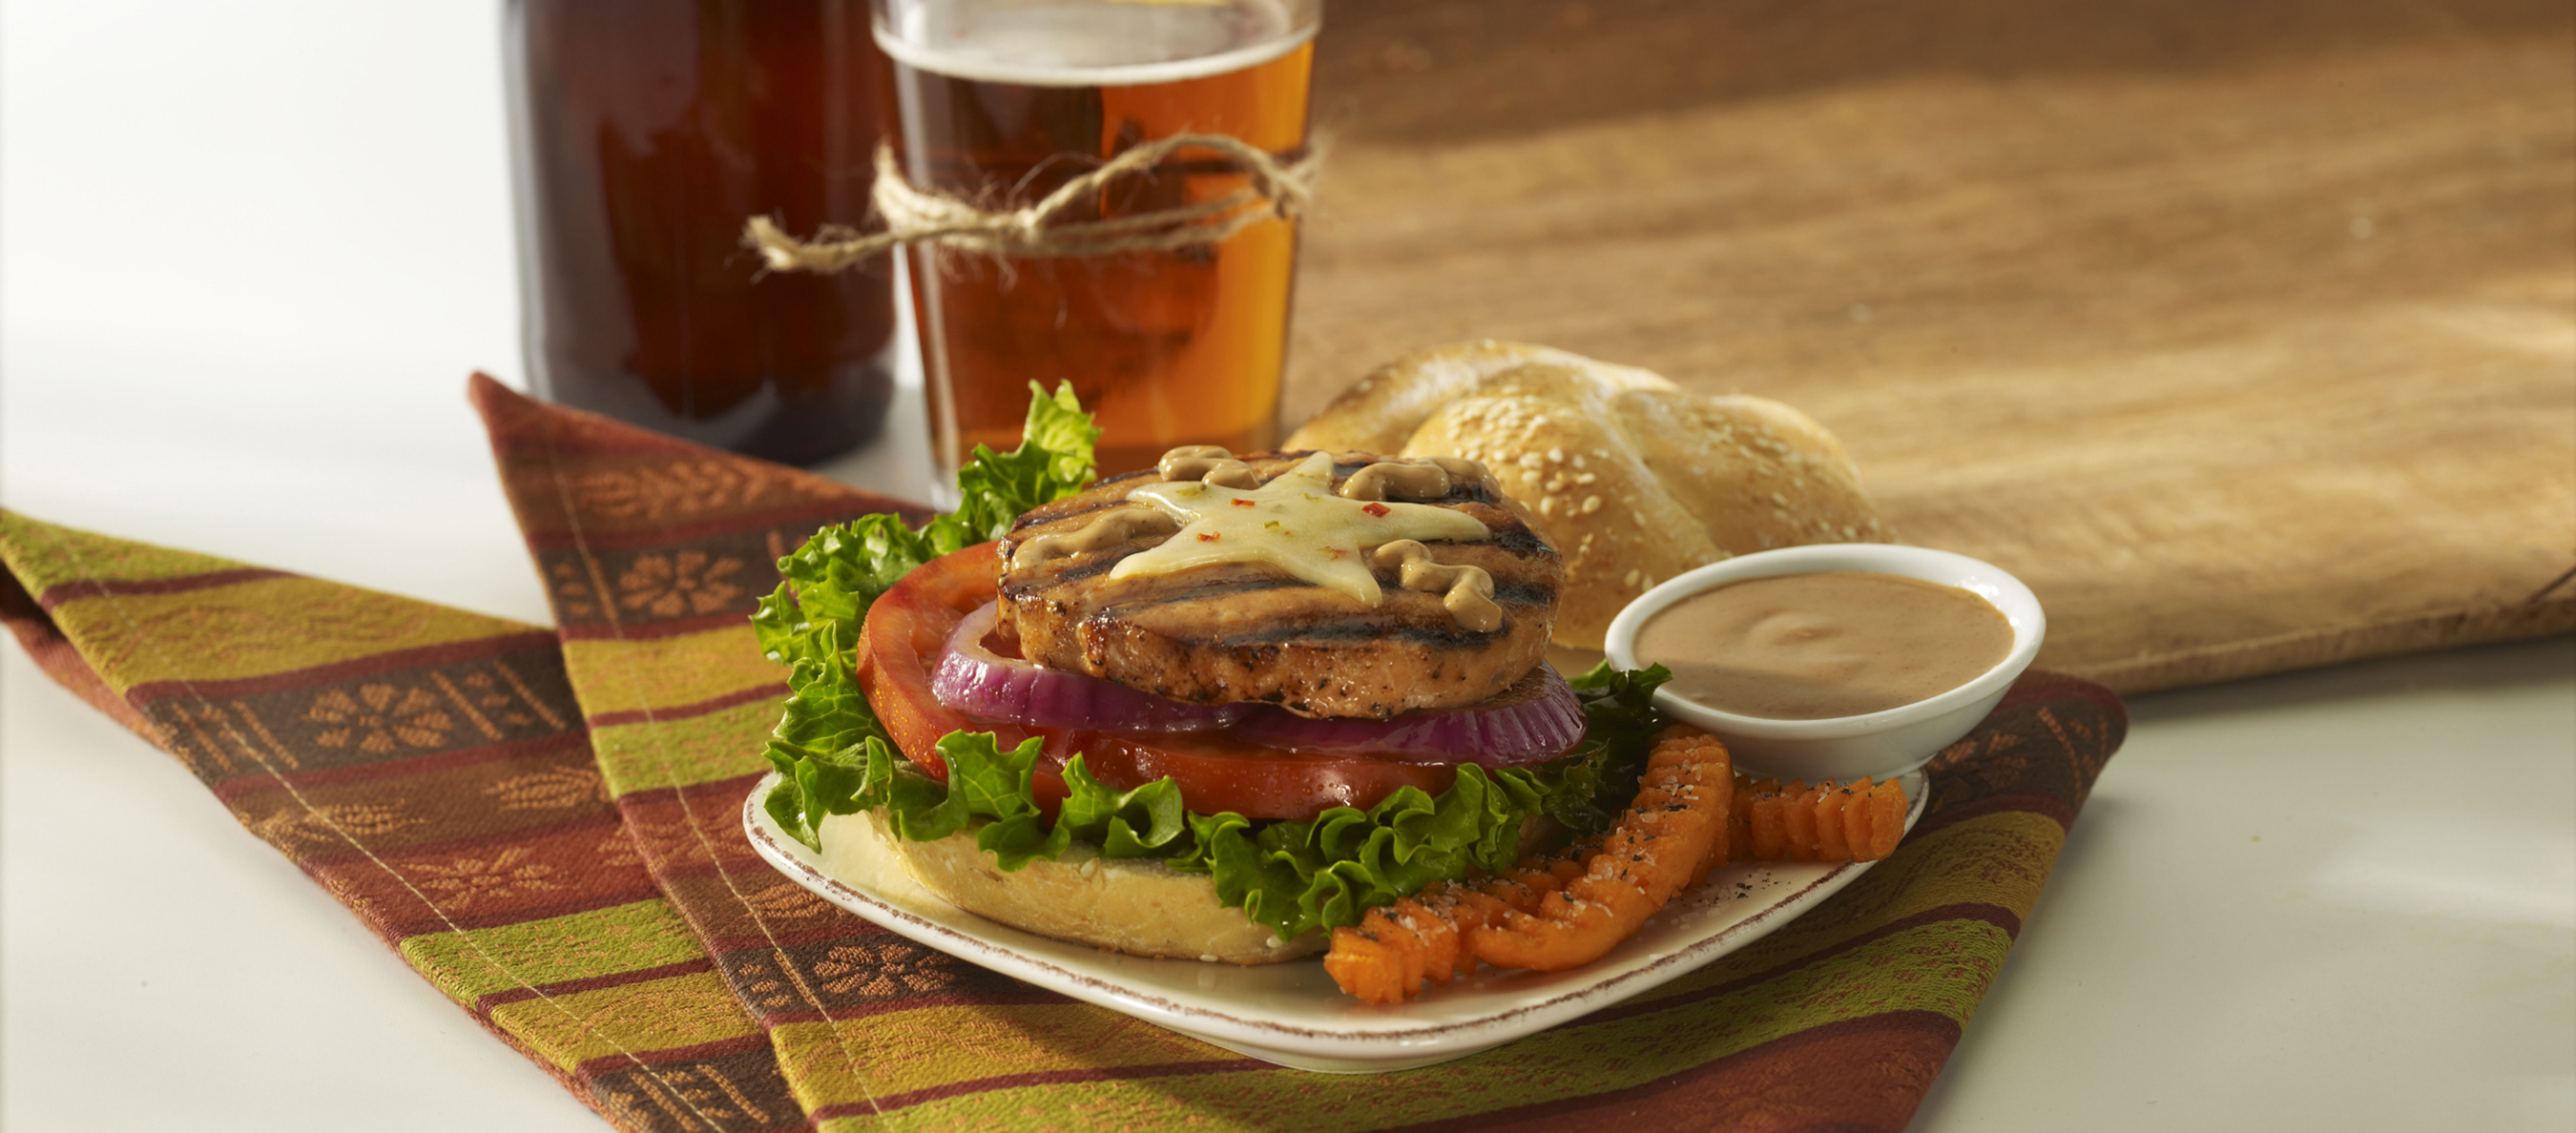 Summer Grilling Gets an Upgrade with SeaPak's Salmon Burgers